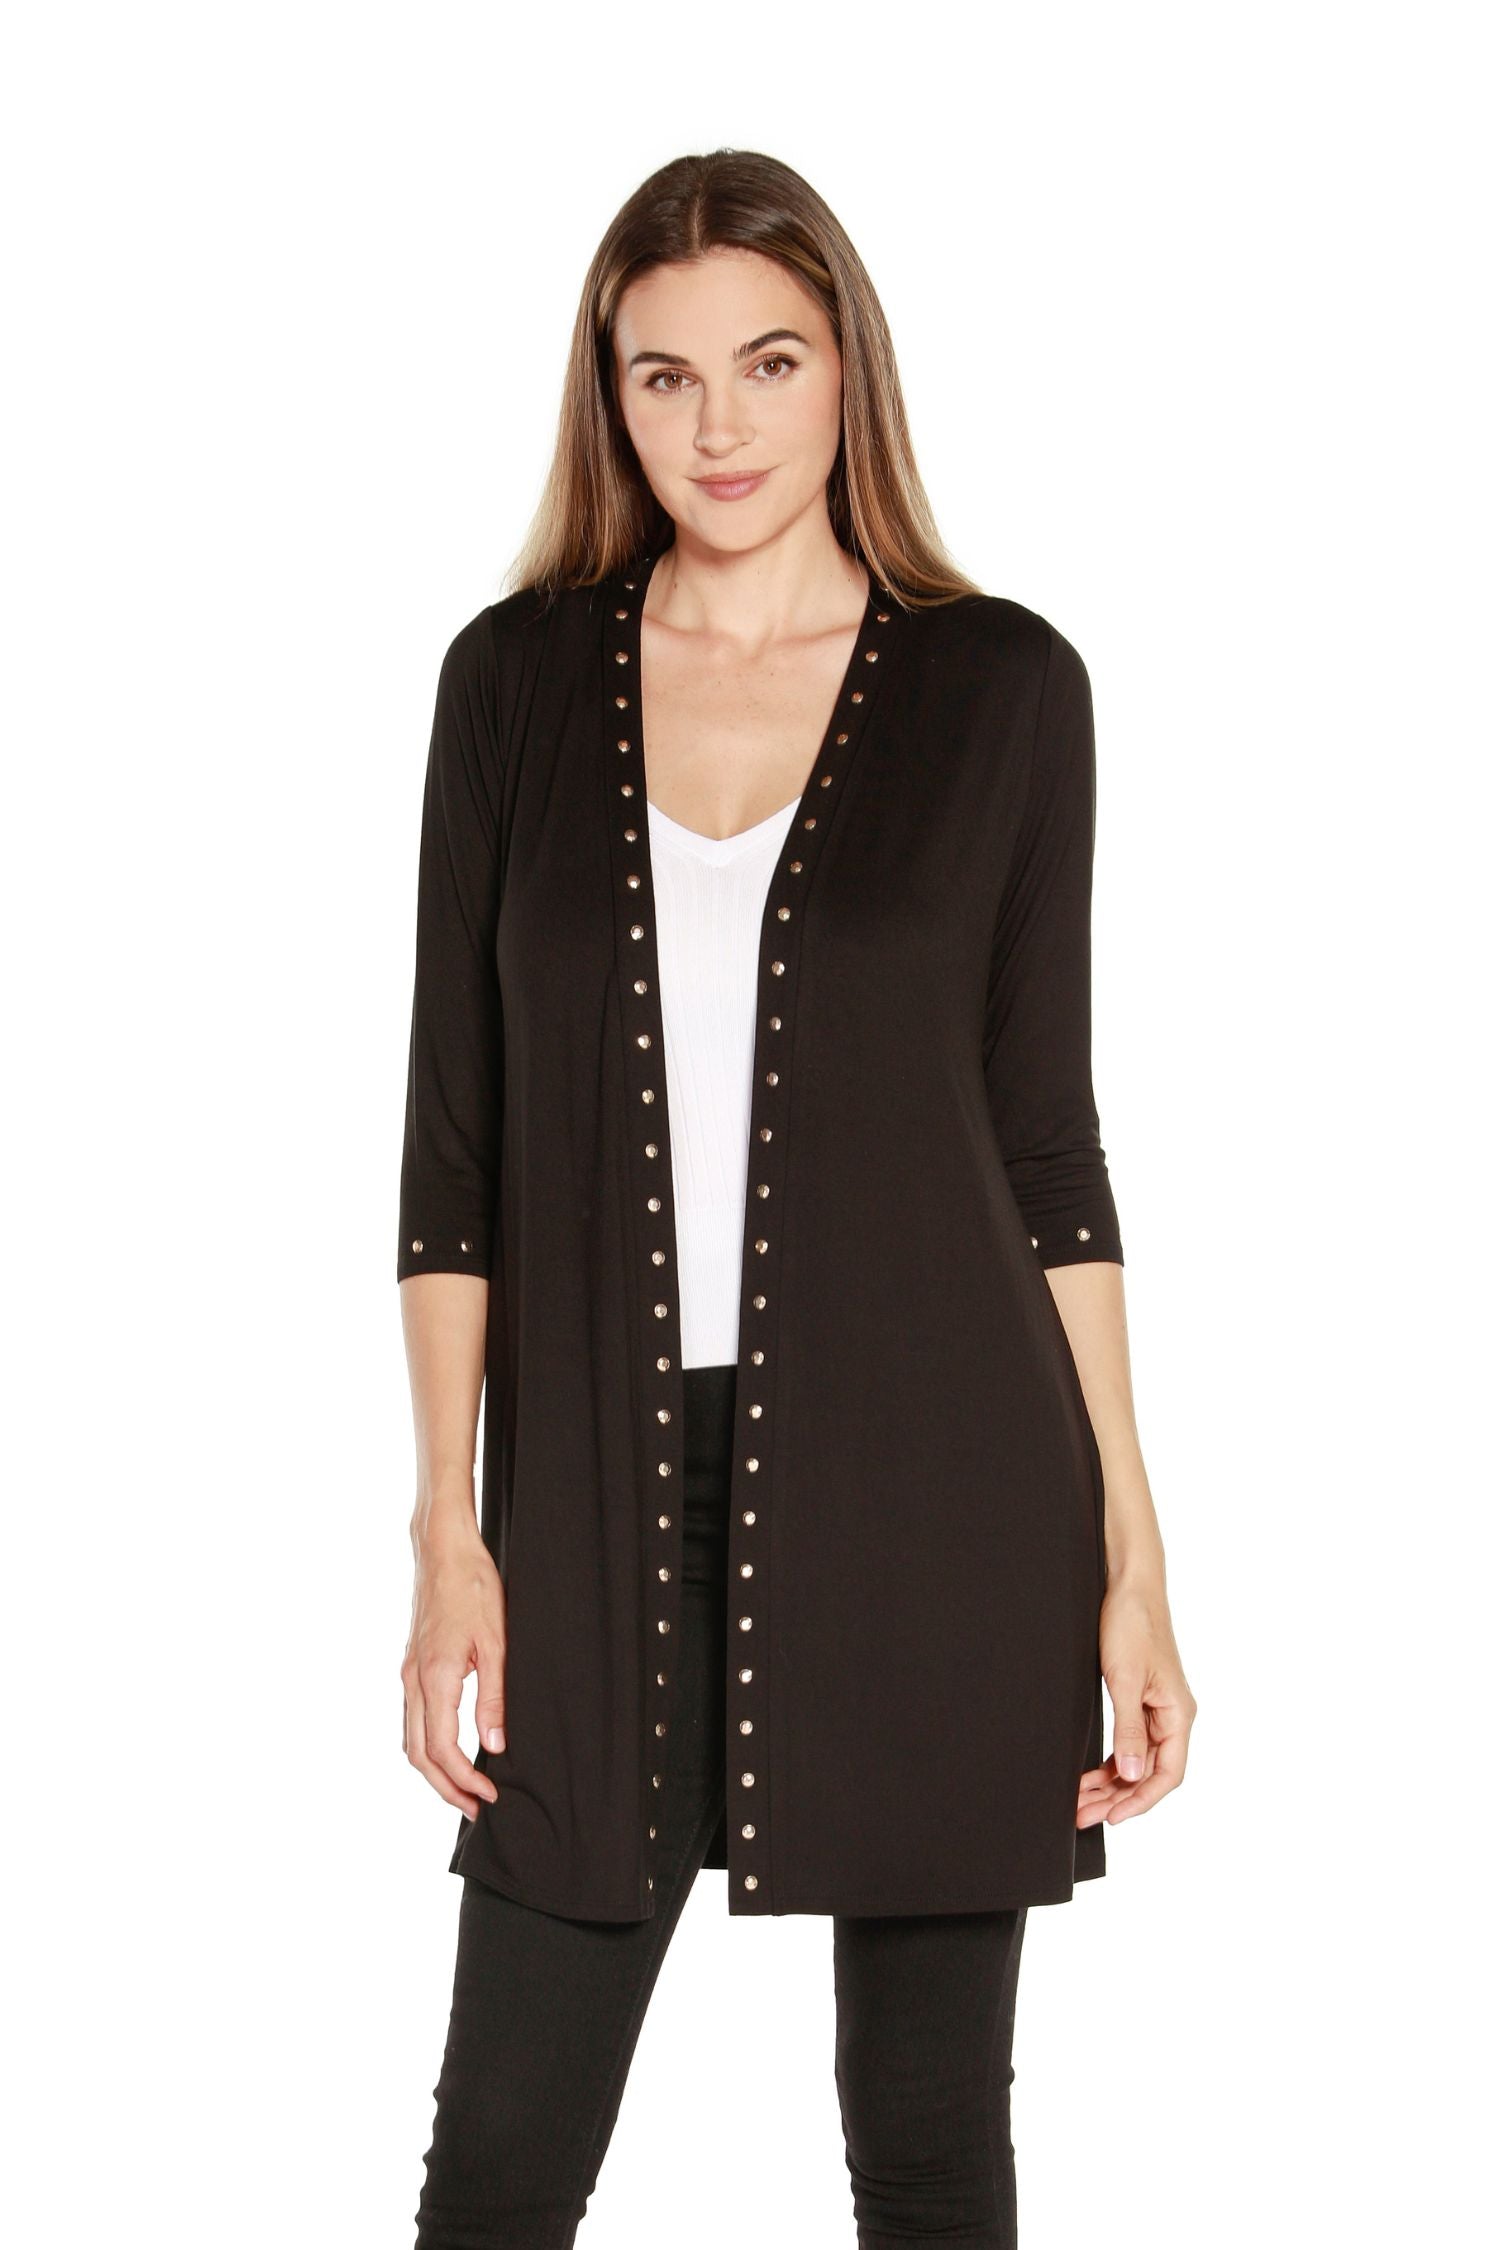 Women's Stylish Long Knit Cardigan Lightweight with 3/4 Sleeves and Rhinestud Trim